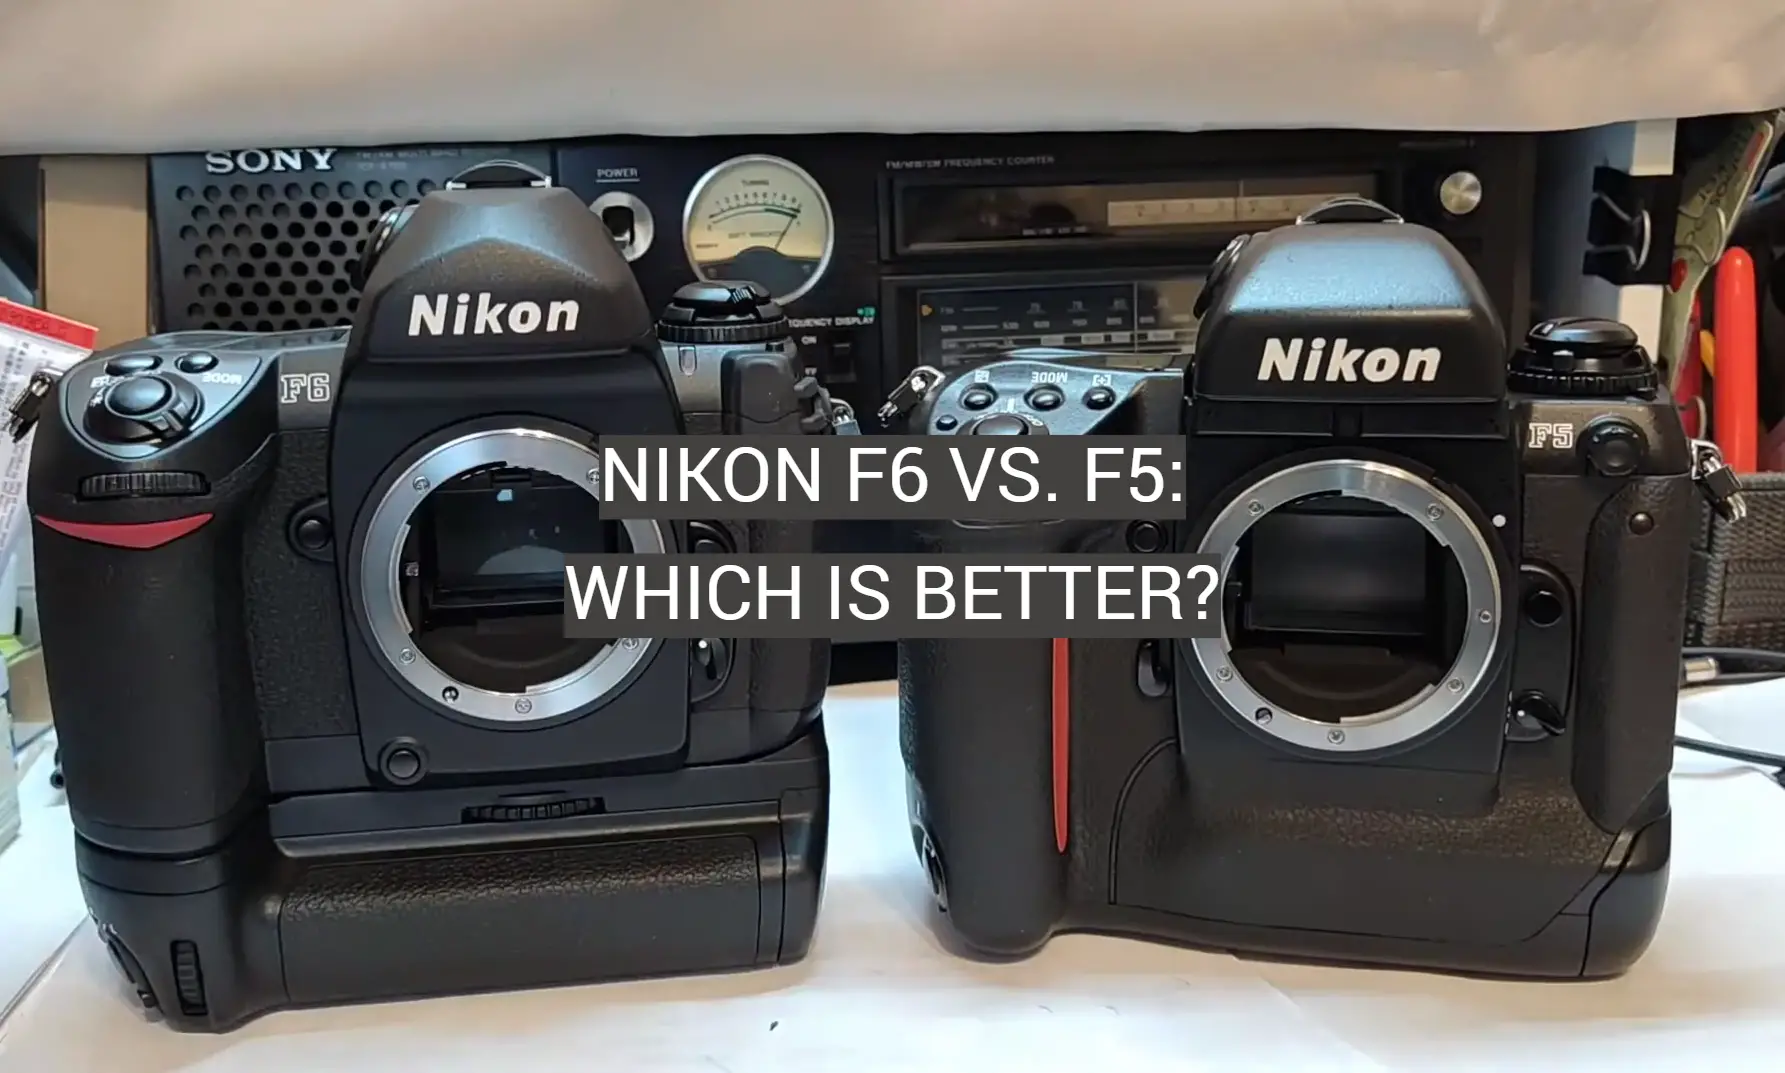 Nikon F6 vs. F5: Which is Better?